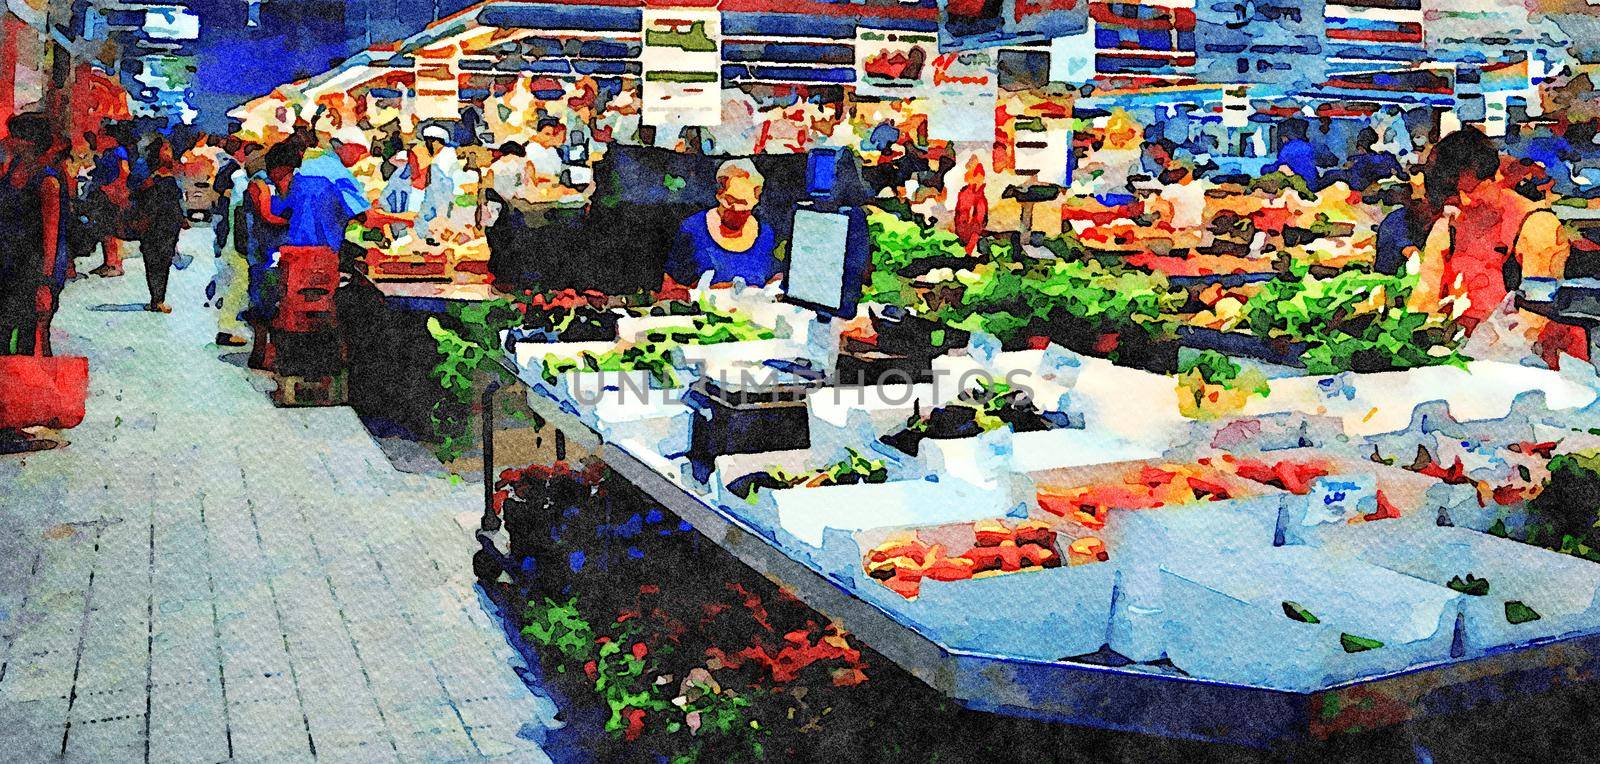 Digital watercolorstyle which represents a fruit and vegetable market in Italy